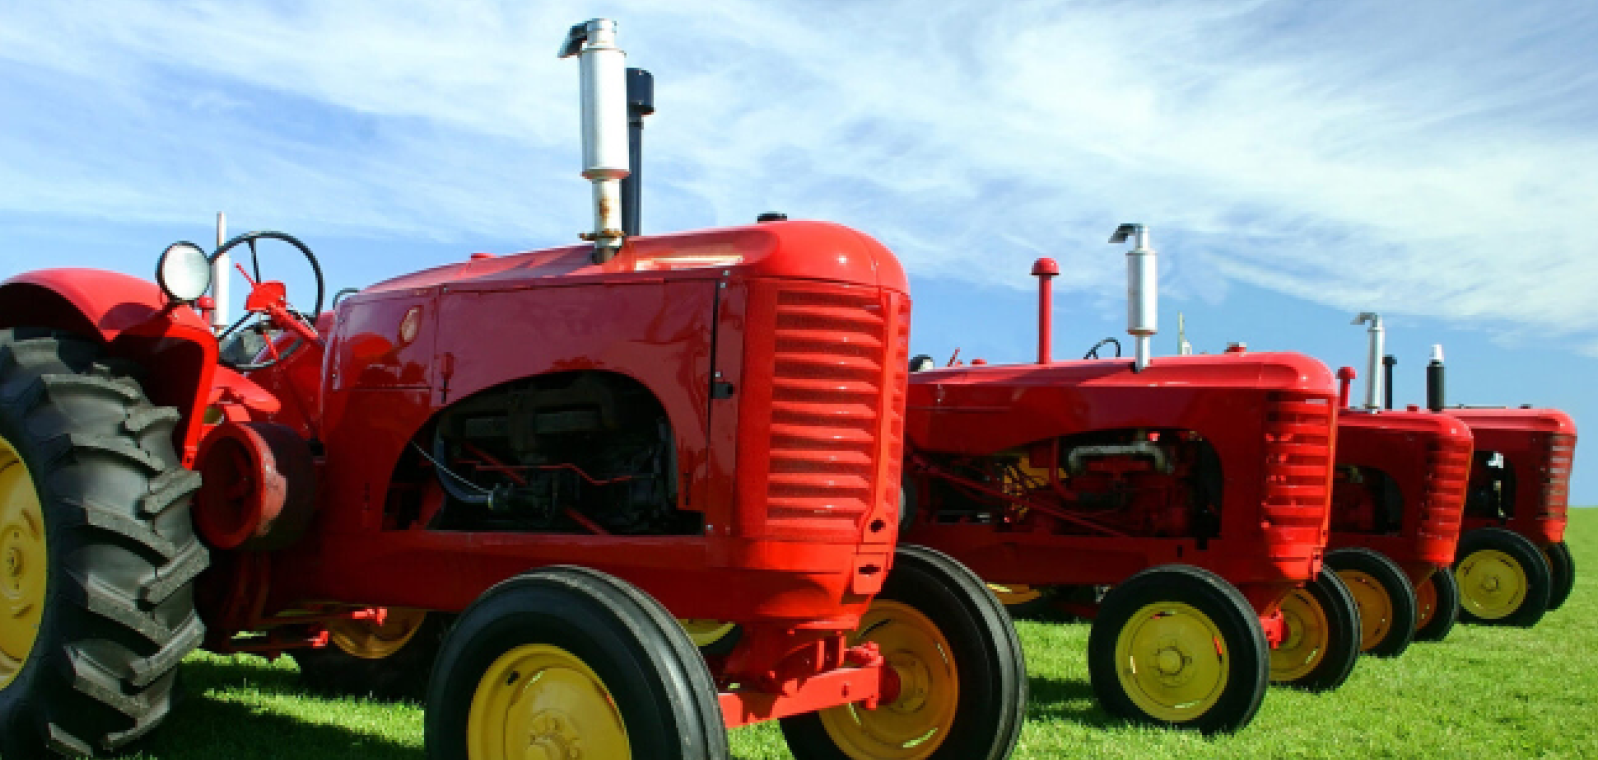 Four red tractors lined up